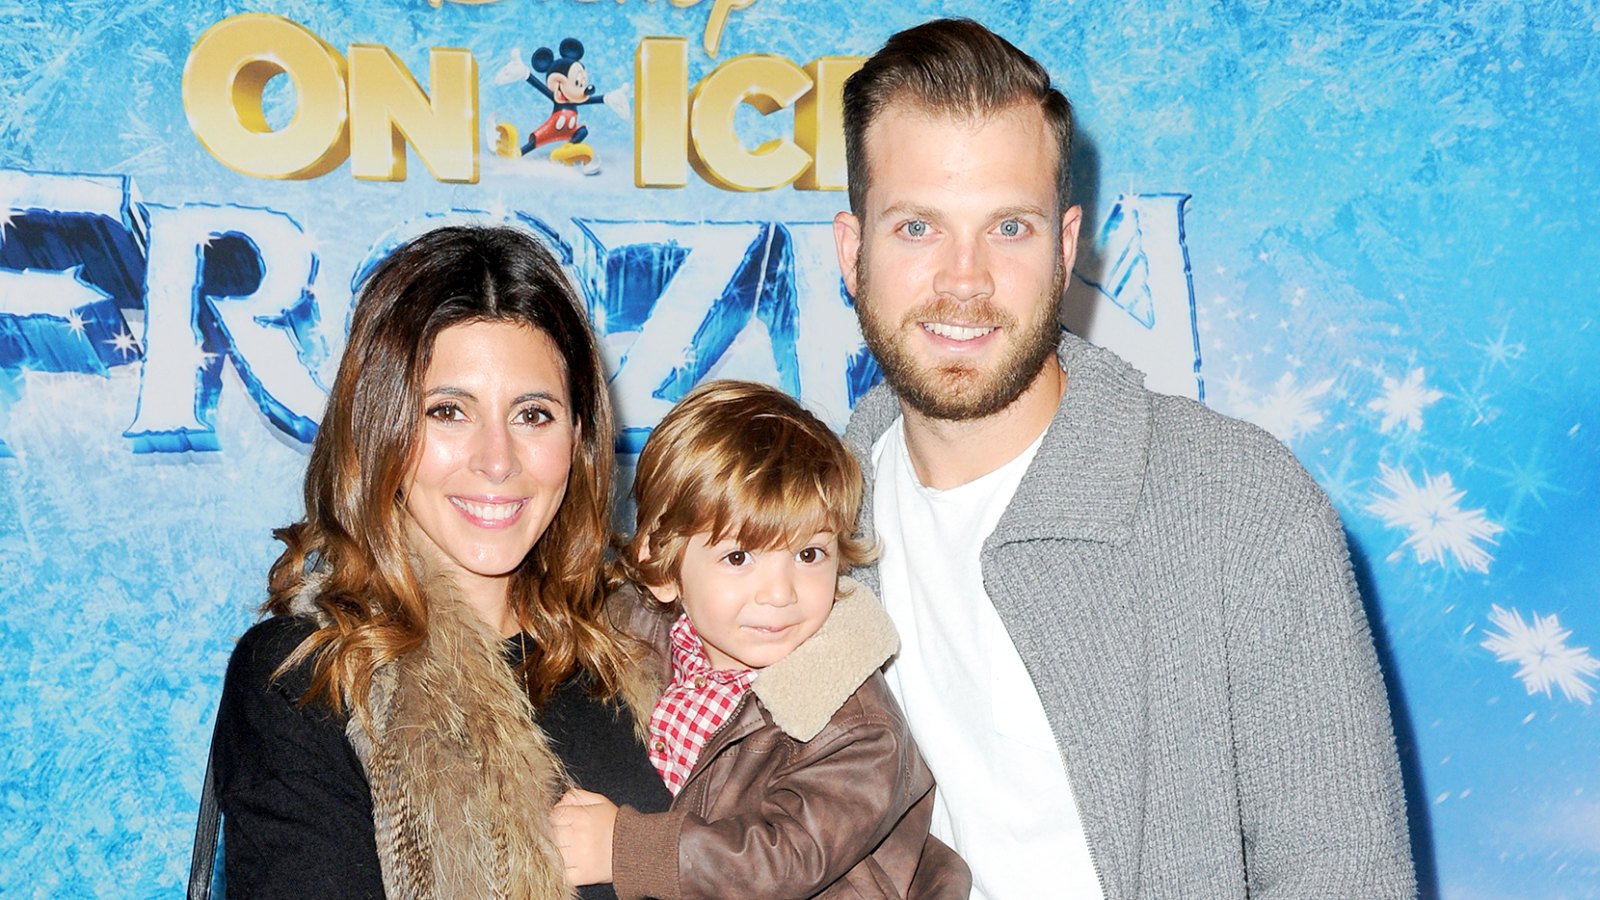 Jamie-Lynn Sigler and Cutter Dykstra with son Beau attend Frozen celebrity premiere presented by Disney On Ice held at the Staples Center on Thursday, Dec.10, 2015, in Los Angeles.